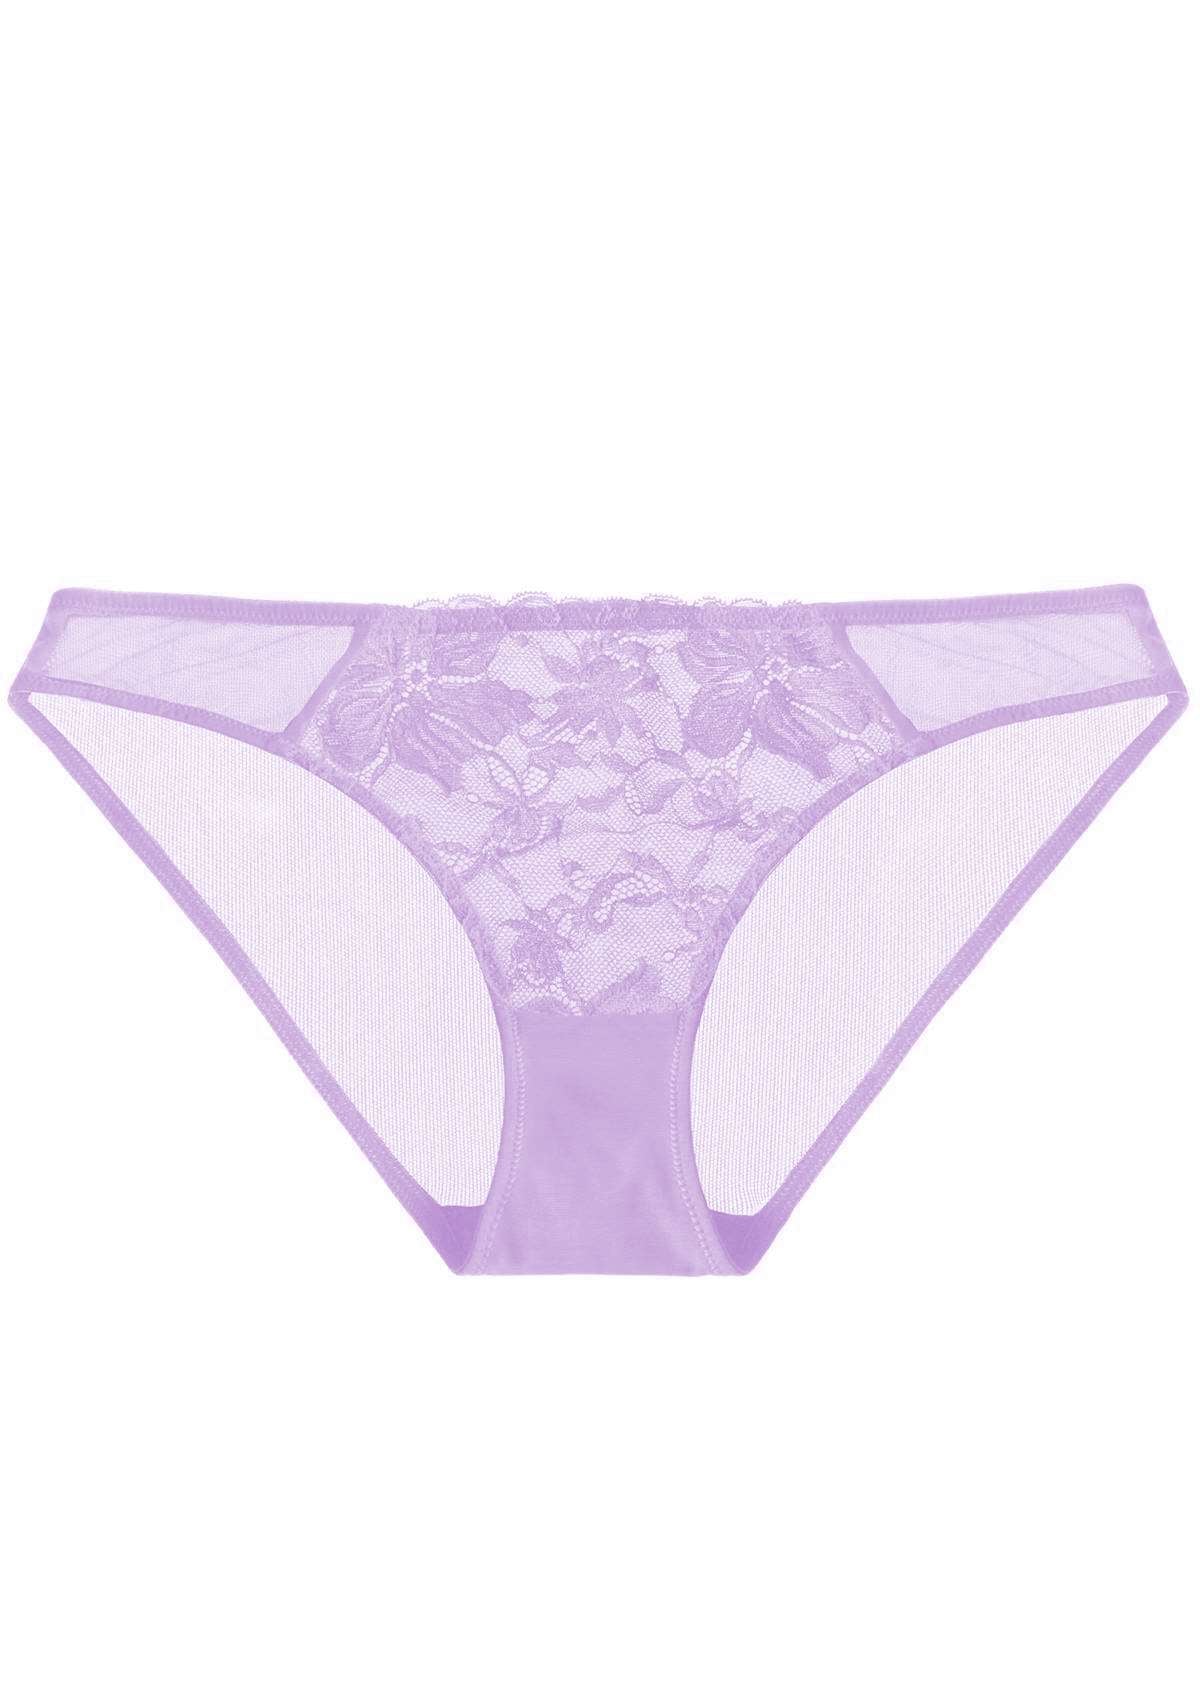 HSIA Mid-Rise Delicate Lace Sheer Underwear, Breathable And Comfortable - XXL / Purple